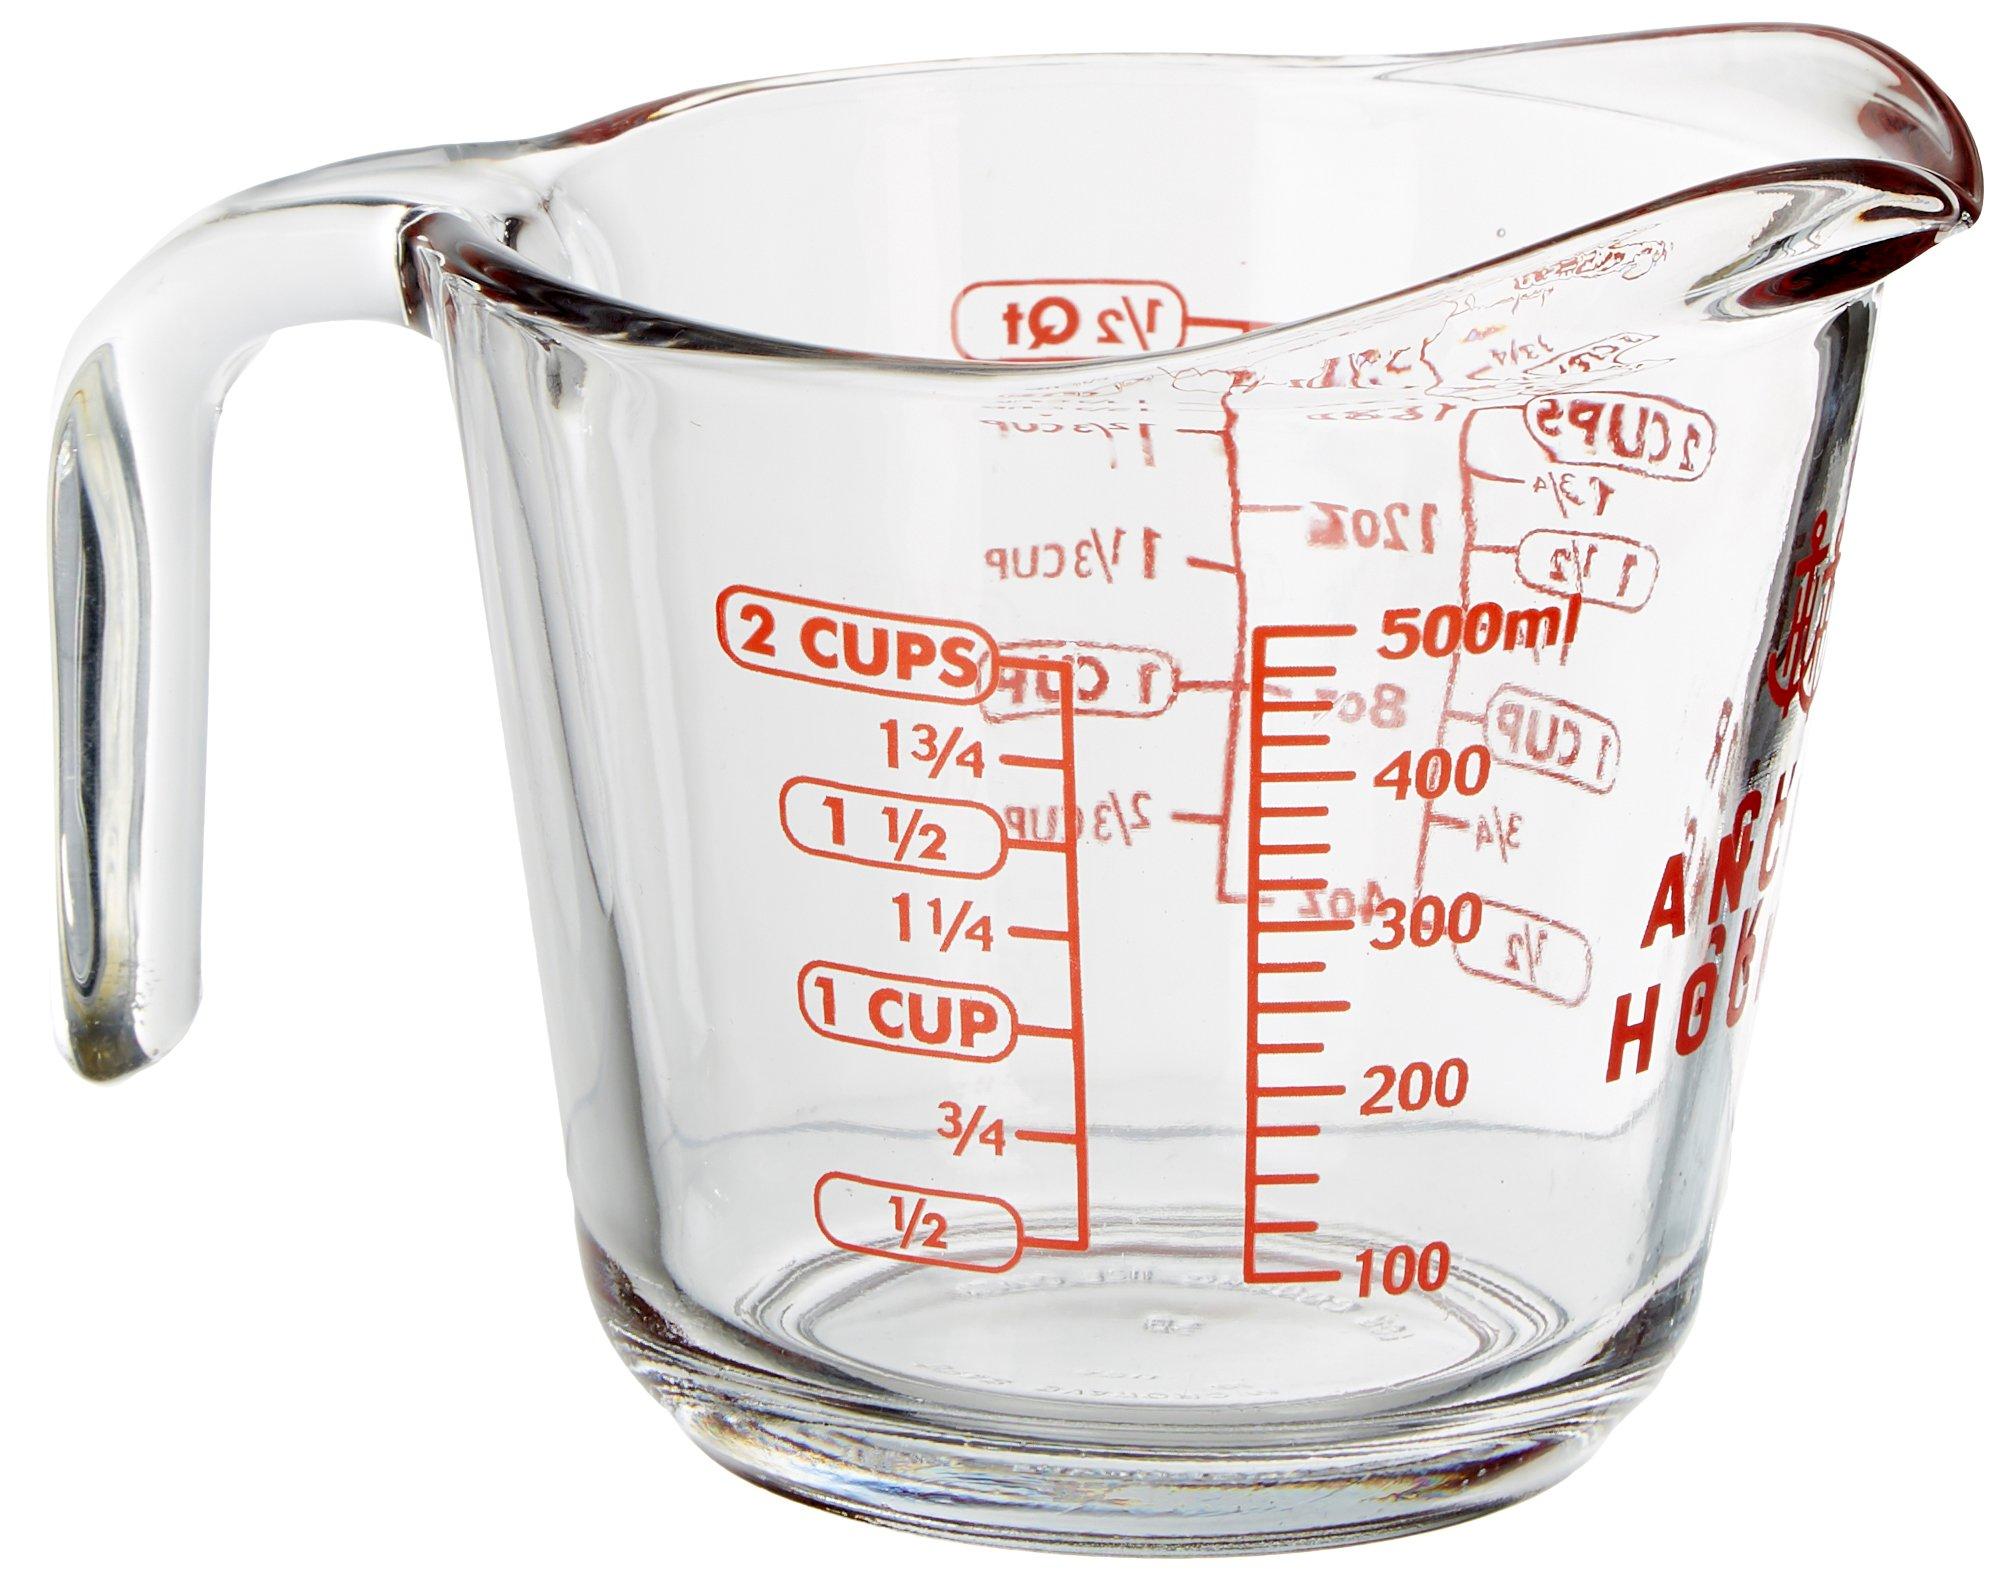 16 oz. Glass Measuring Cup (Case of 4)